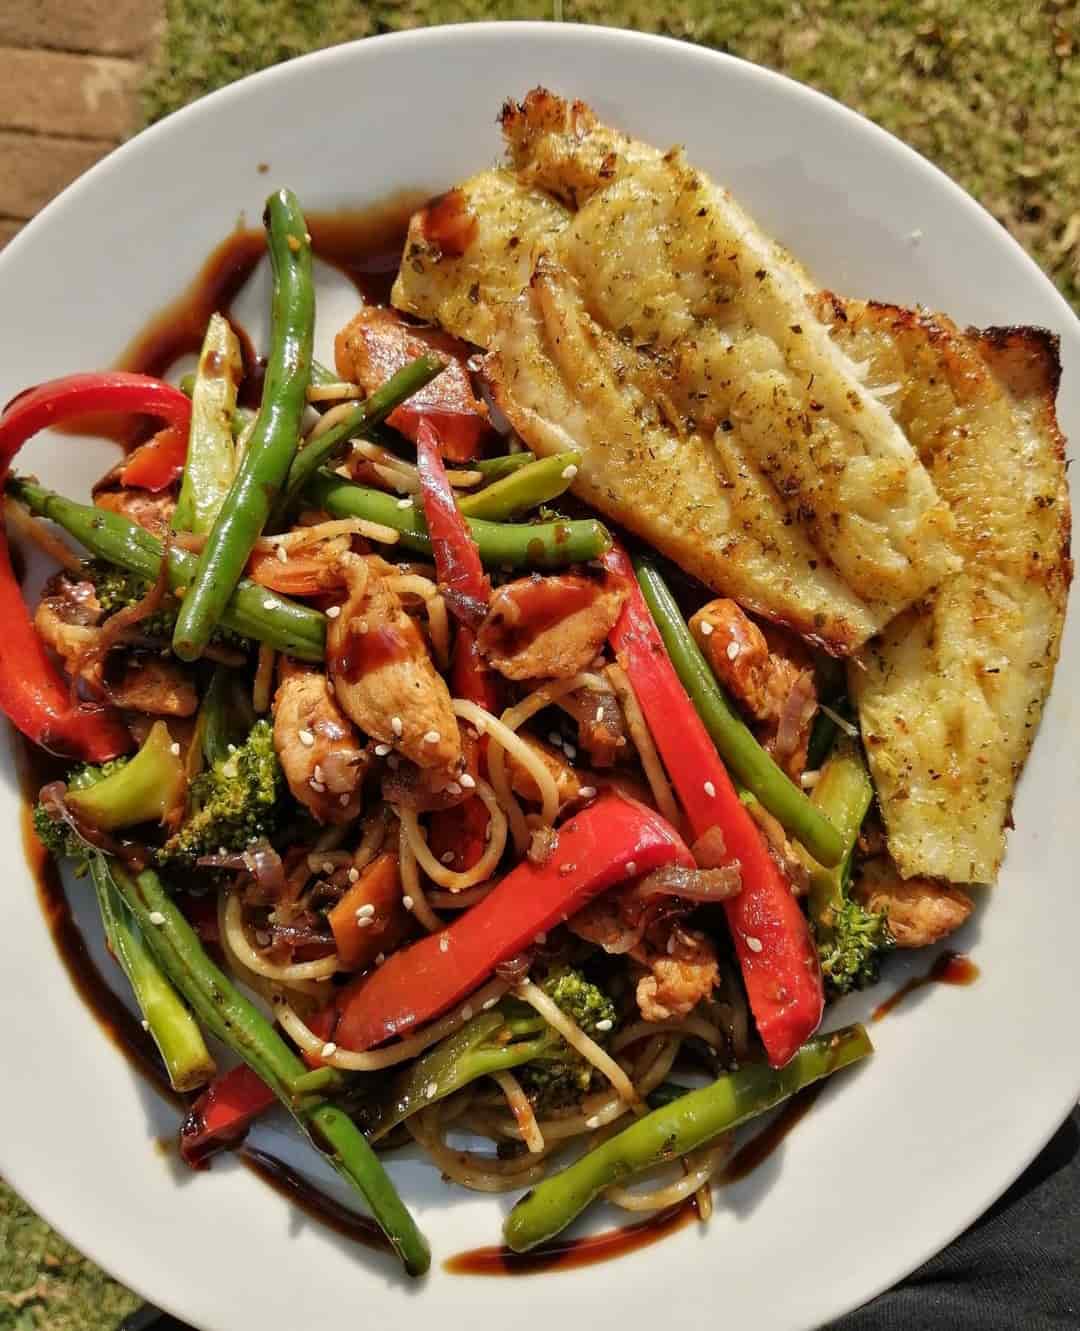 Chicken stir fry served with oven baked hake